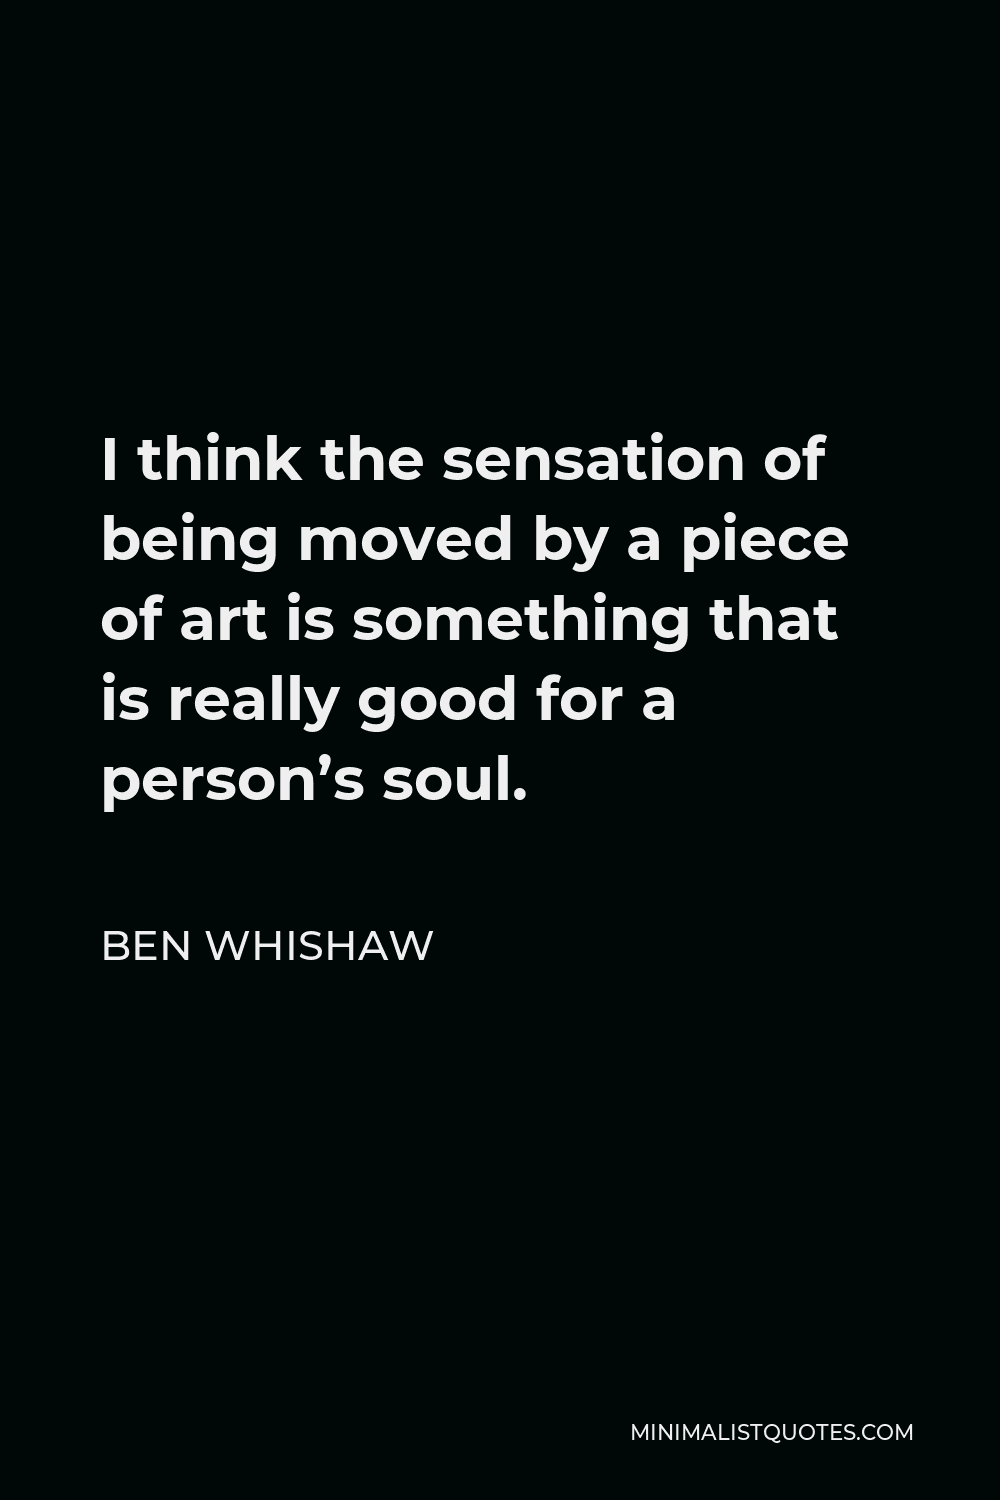 Ben Whishaw Quote - I think the sensation of being moved by a piece of art is something that is really good for a person’s soul.